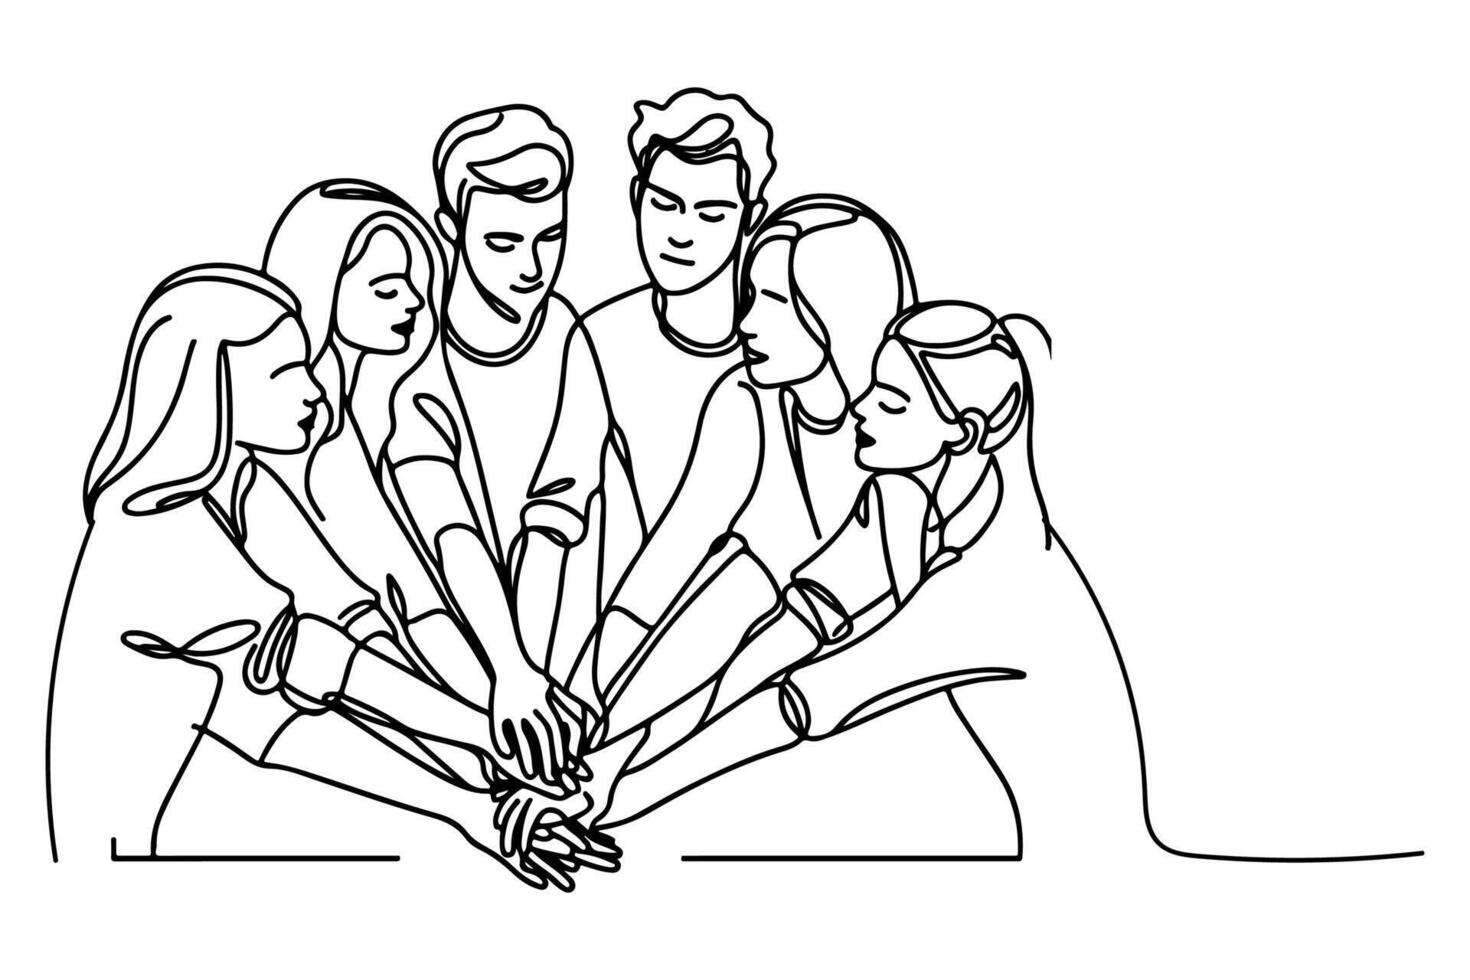 continuous one single black line drawing teamwork group of friends put their hands together illustration isolated on white background vector